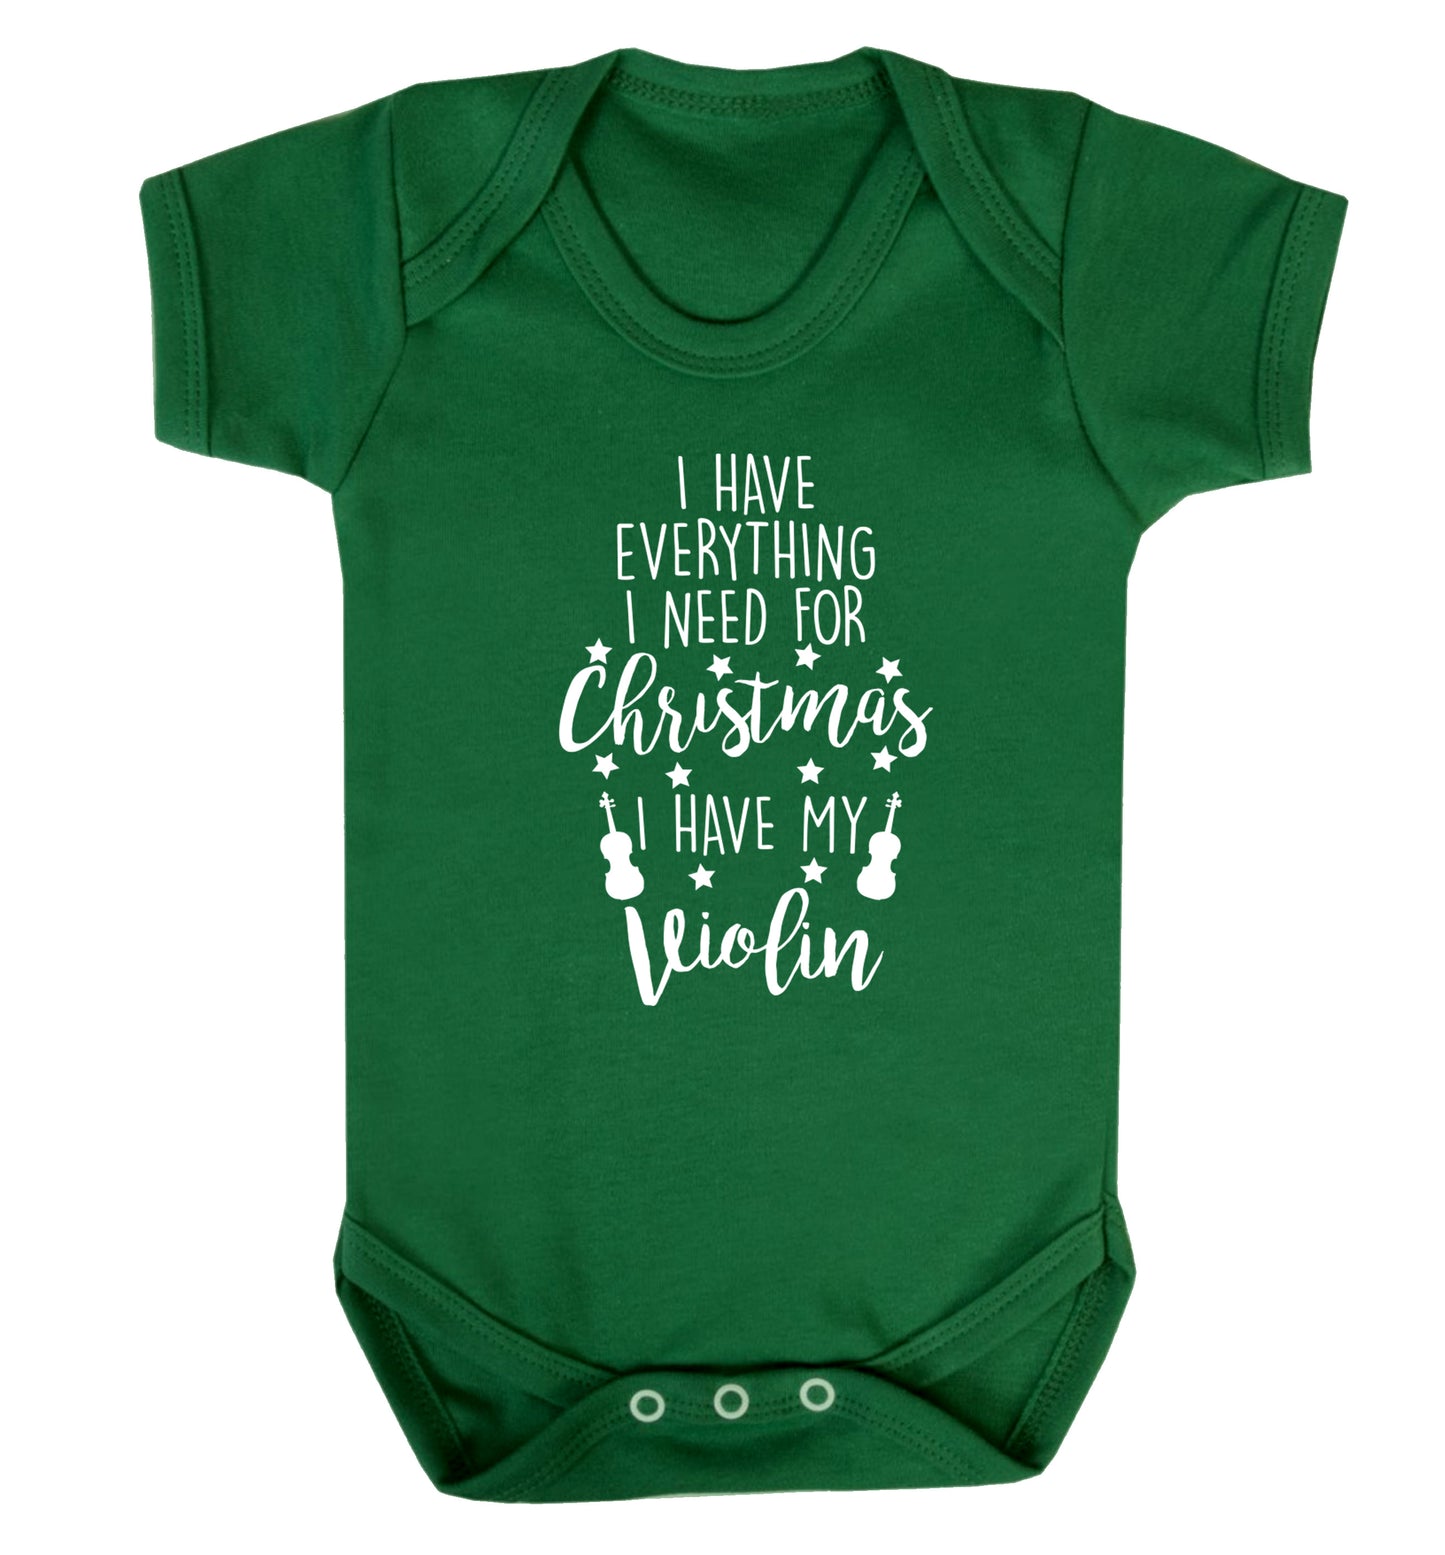 I have everything I need for Christmas I have my violin Baby Vest green 18-24 months